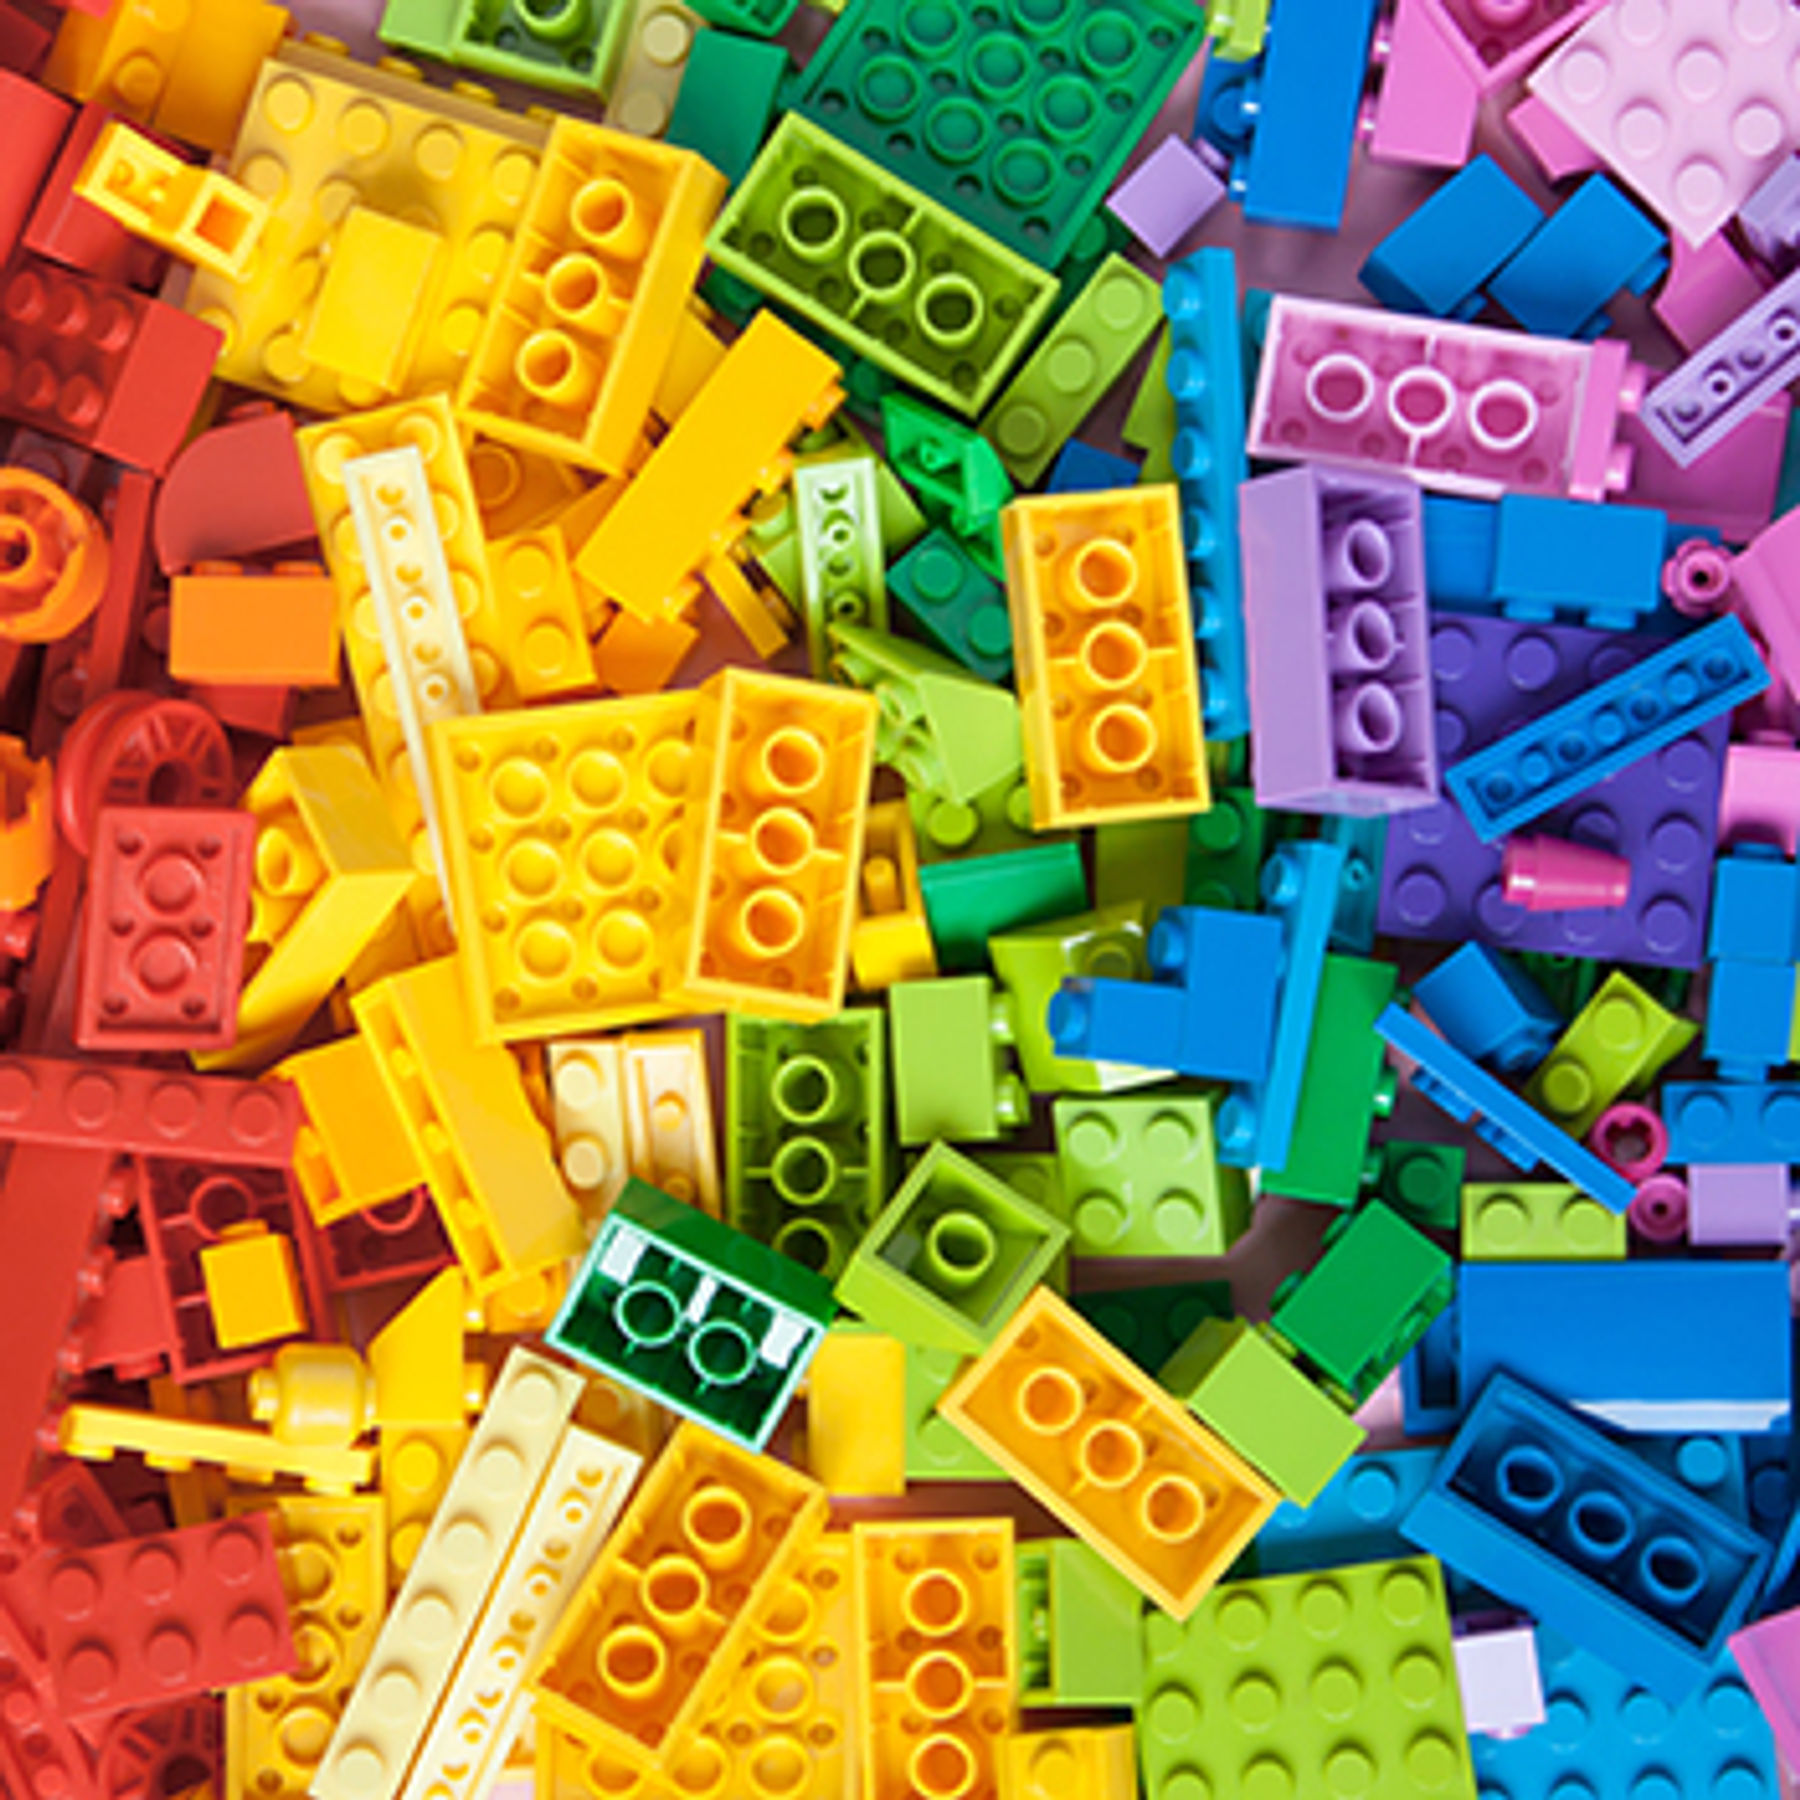 LEGO Club for Families | Downtown Longmont, CO